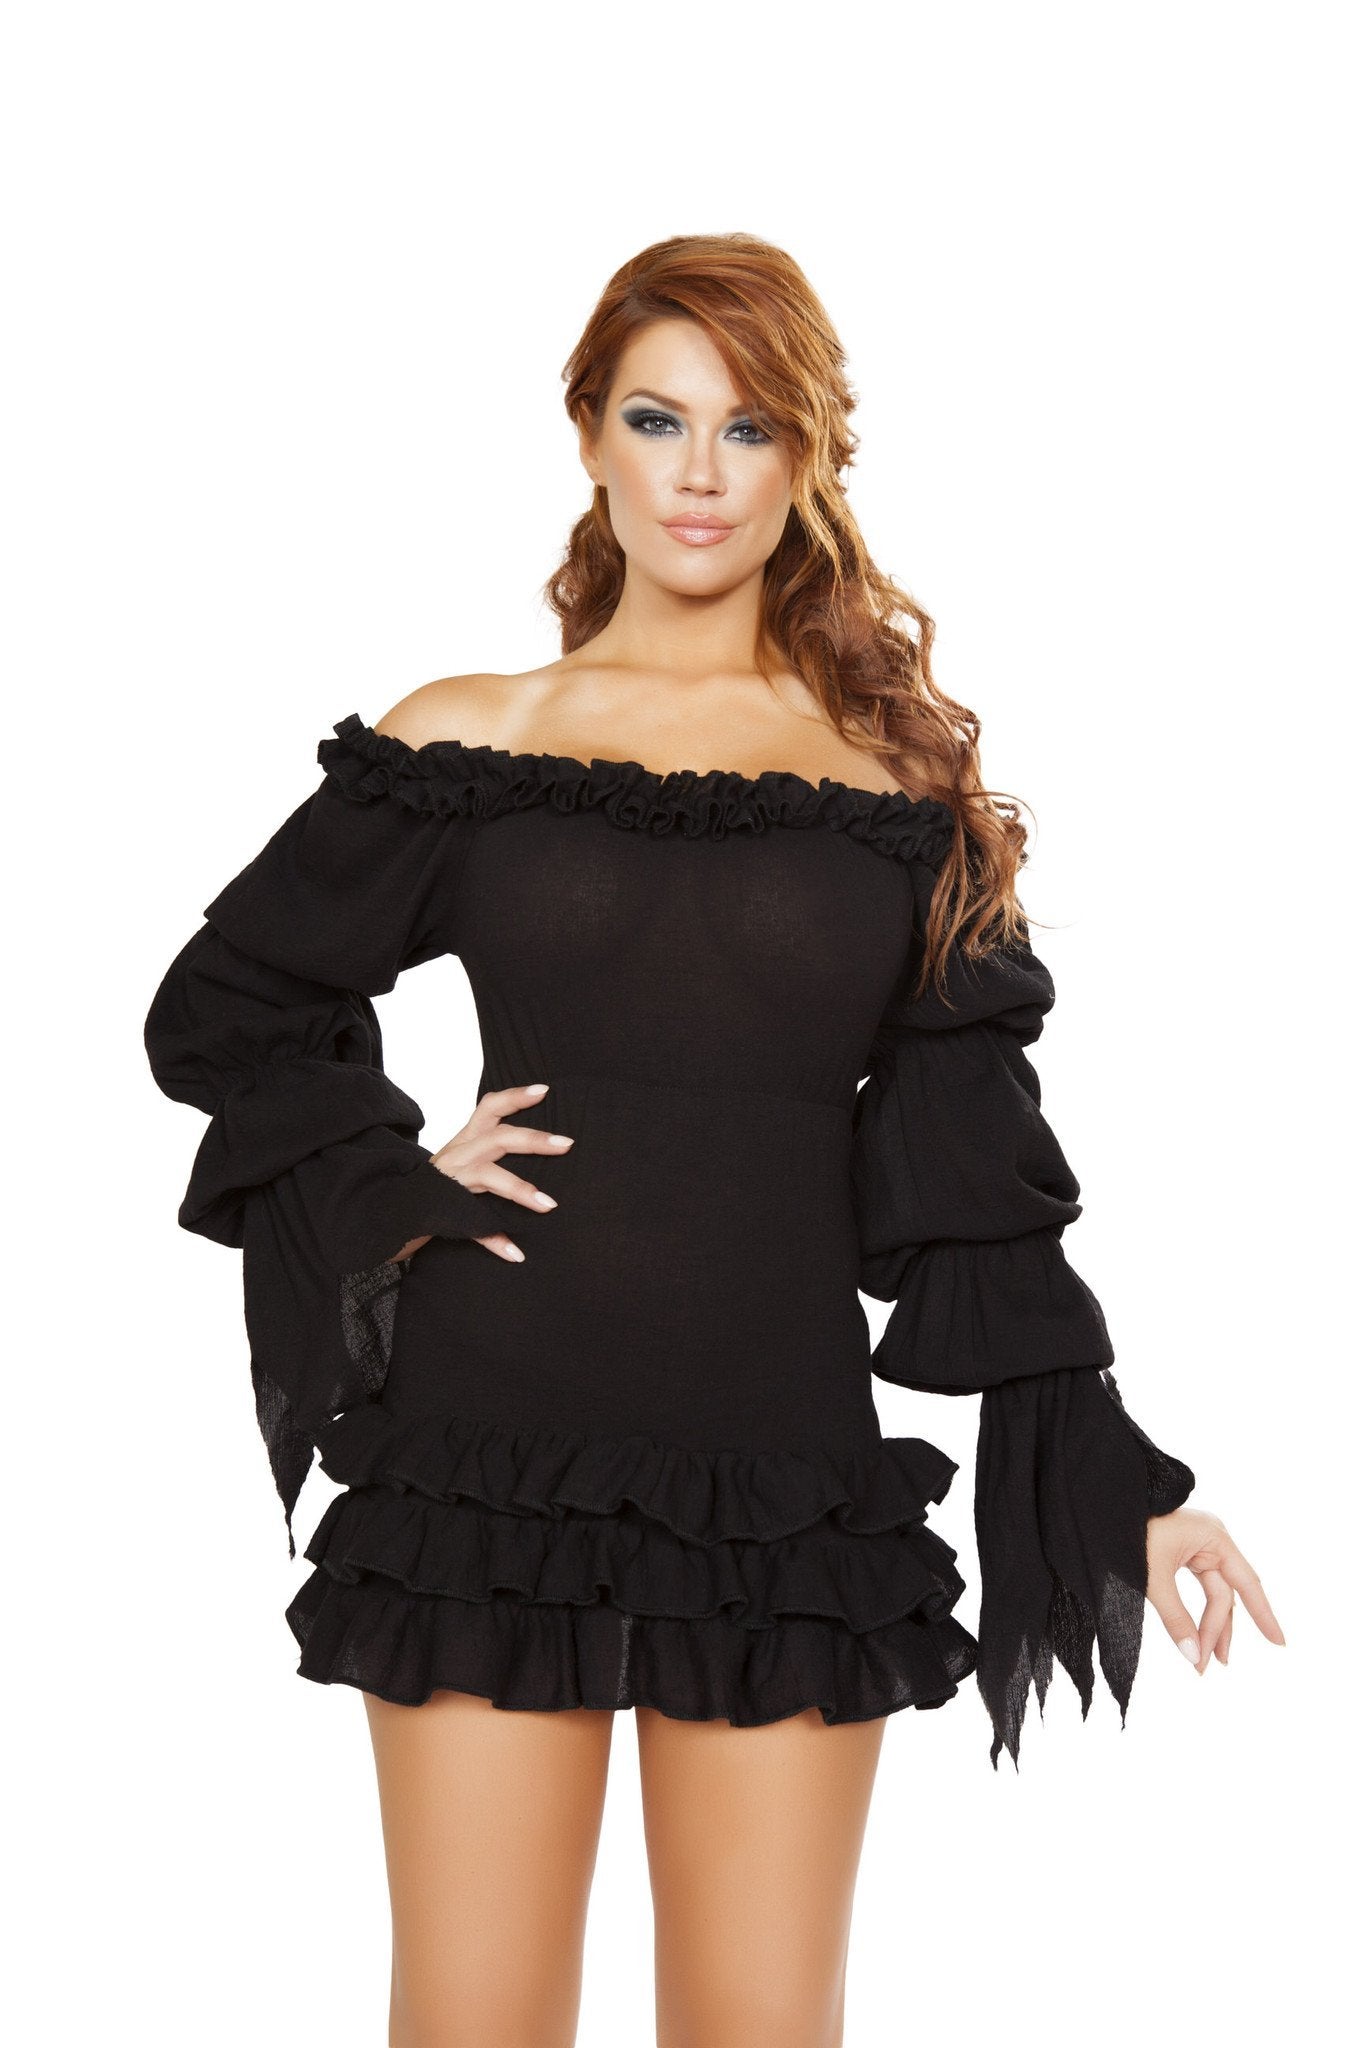 Buy Ruffled Pirate Dress with Sleeves from RomaRetailShop for 22.50 with Same Day Shipping Designed by Roma Costume 4770-Blk-S